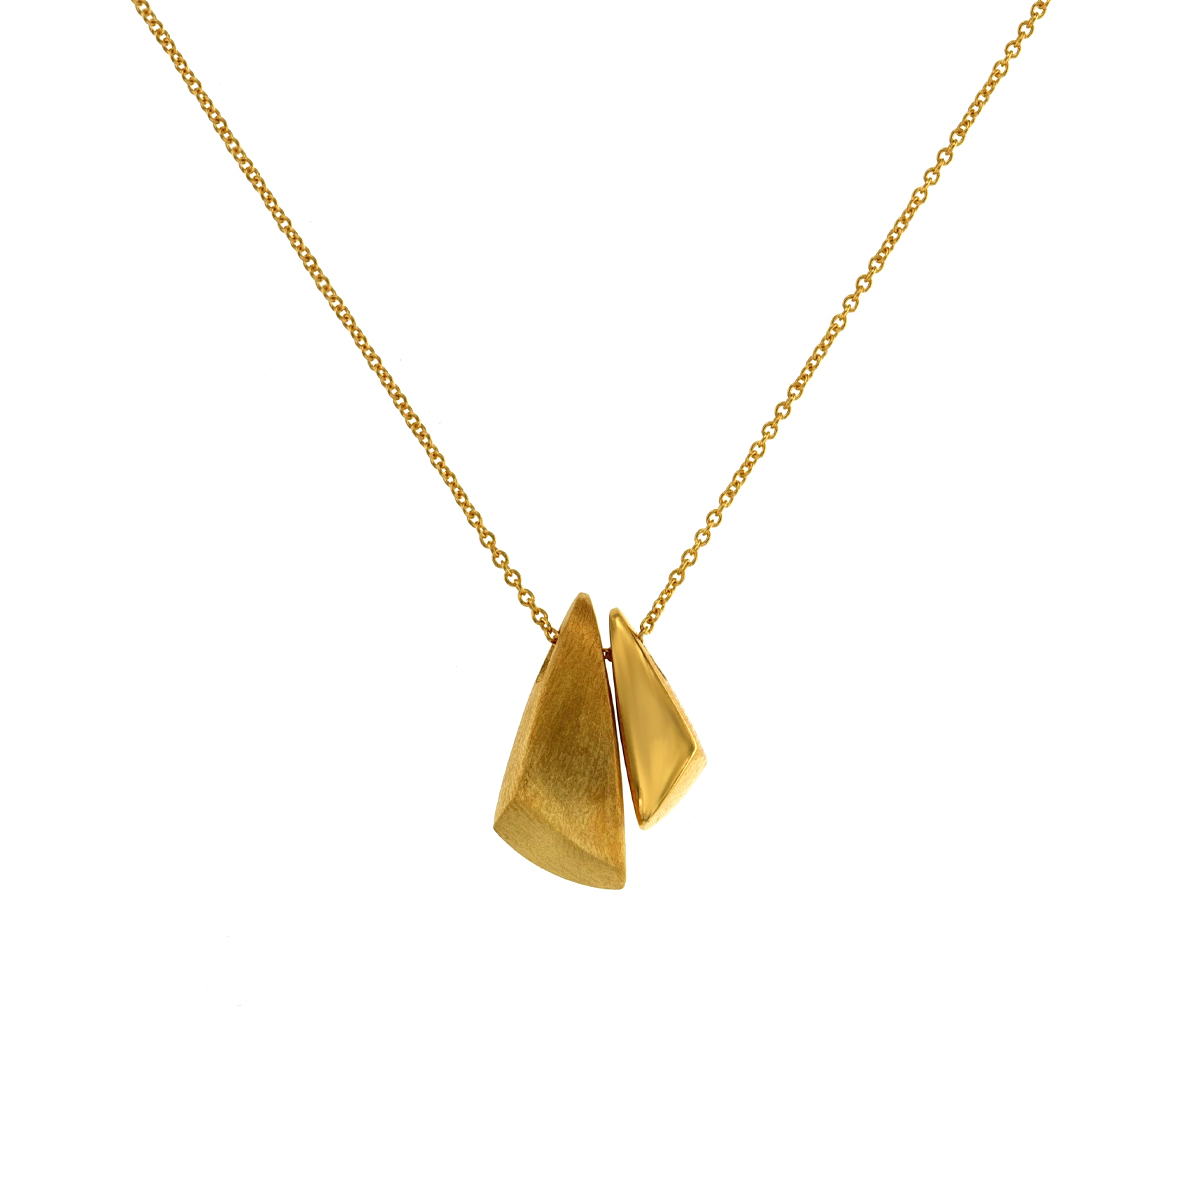 Gold Plated Sterling Silver Triangular Double Pendant with Chain